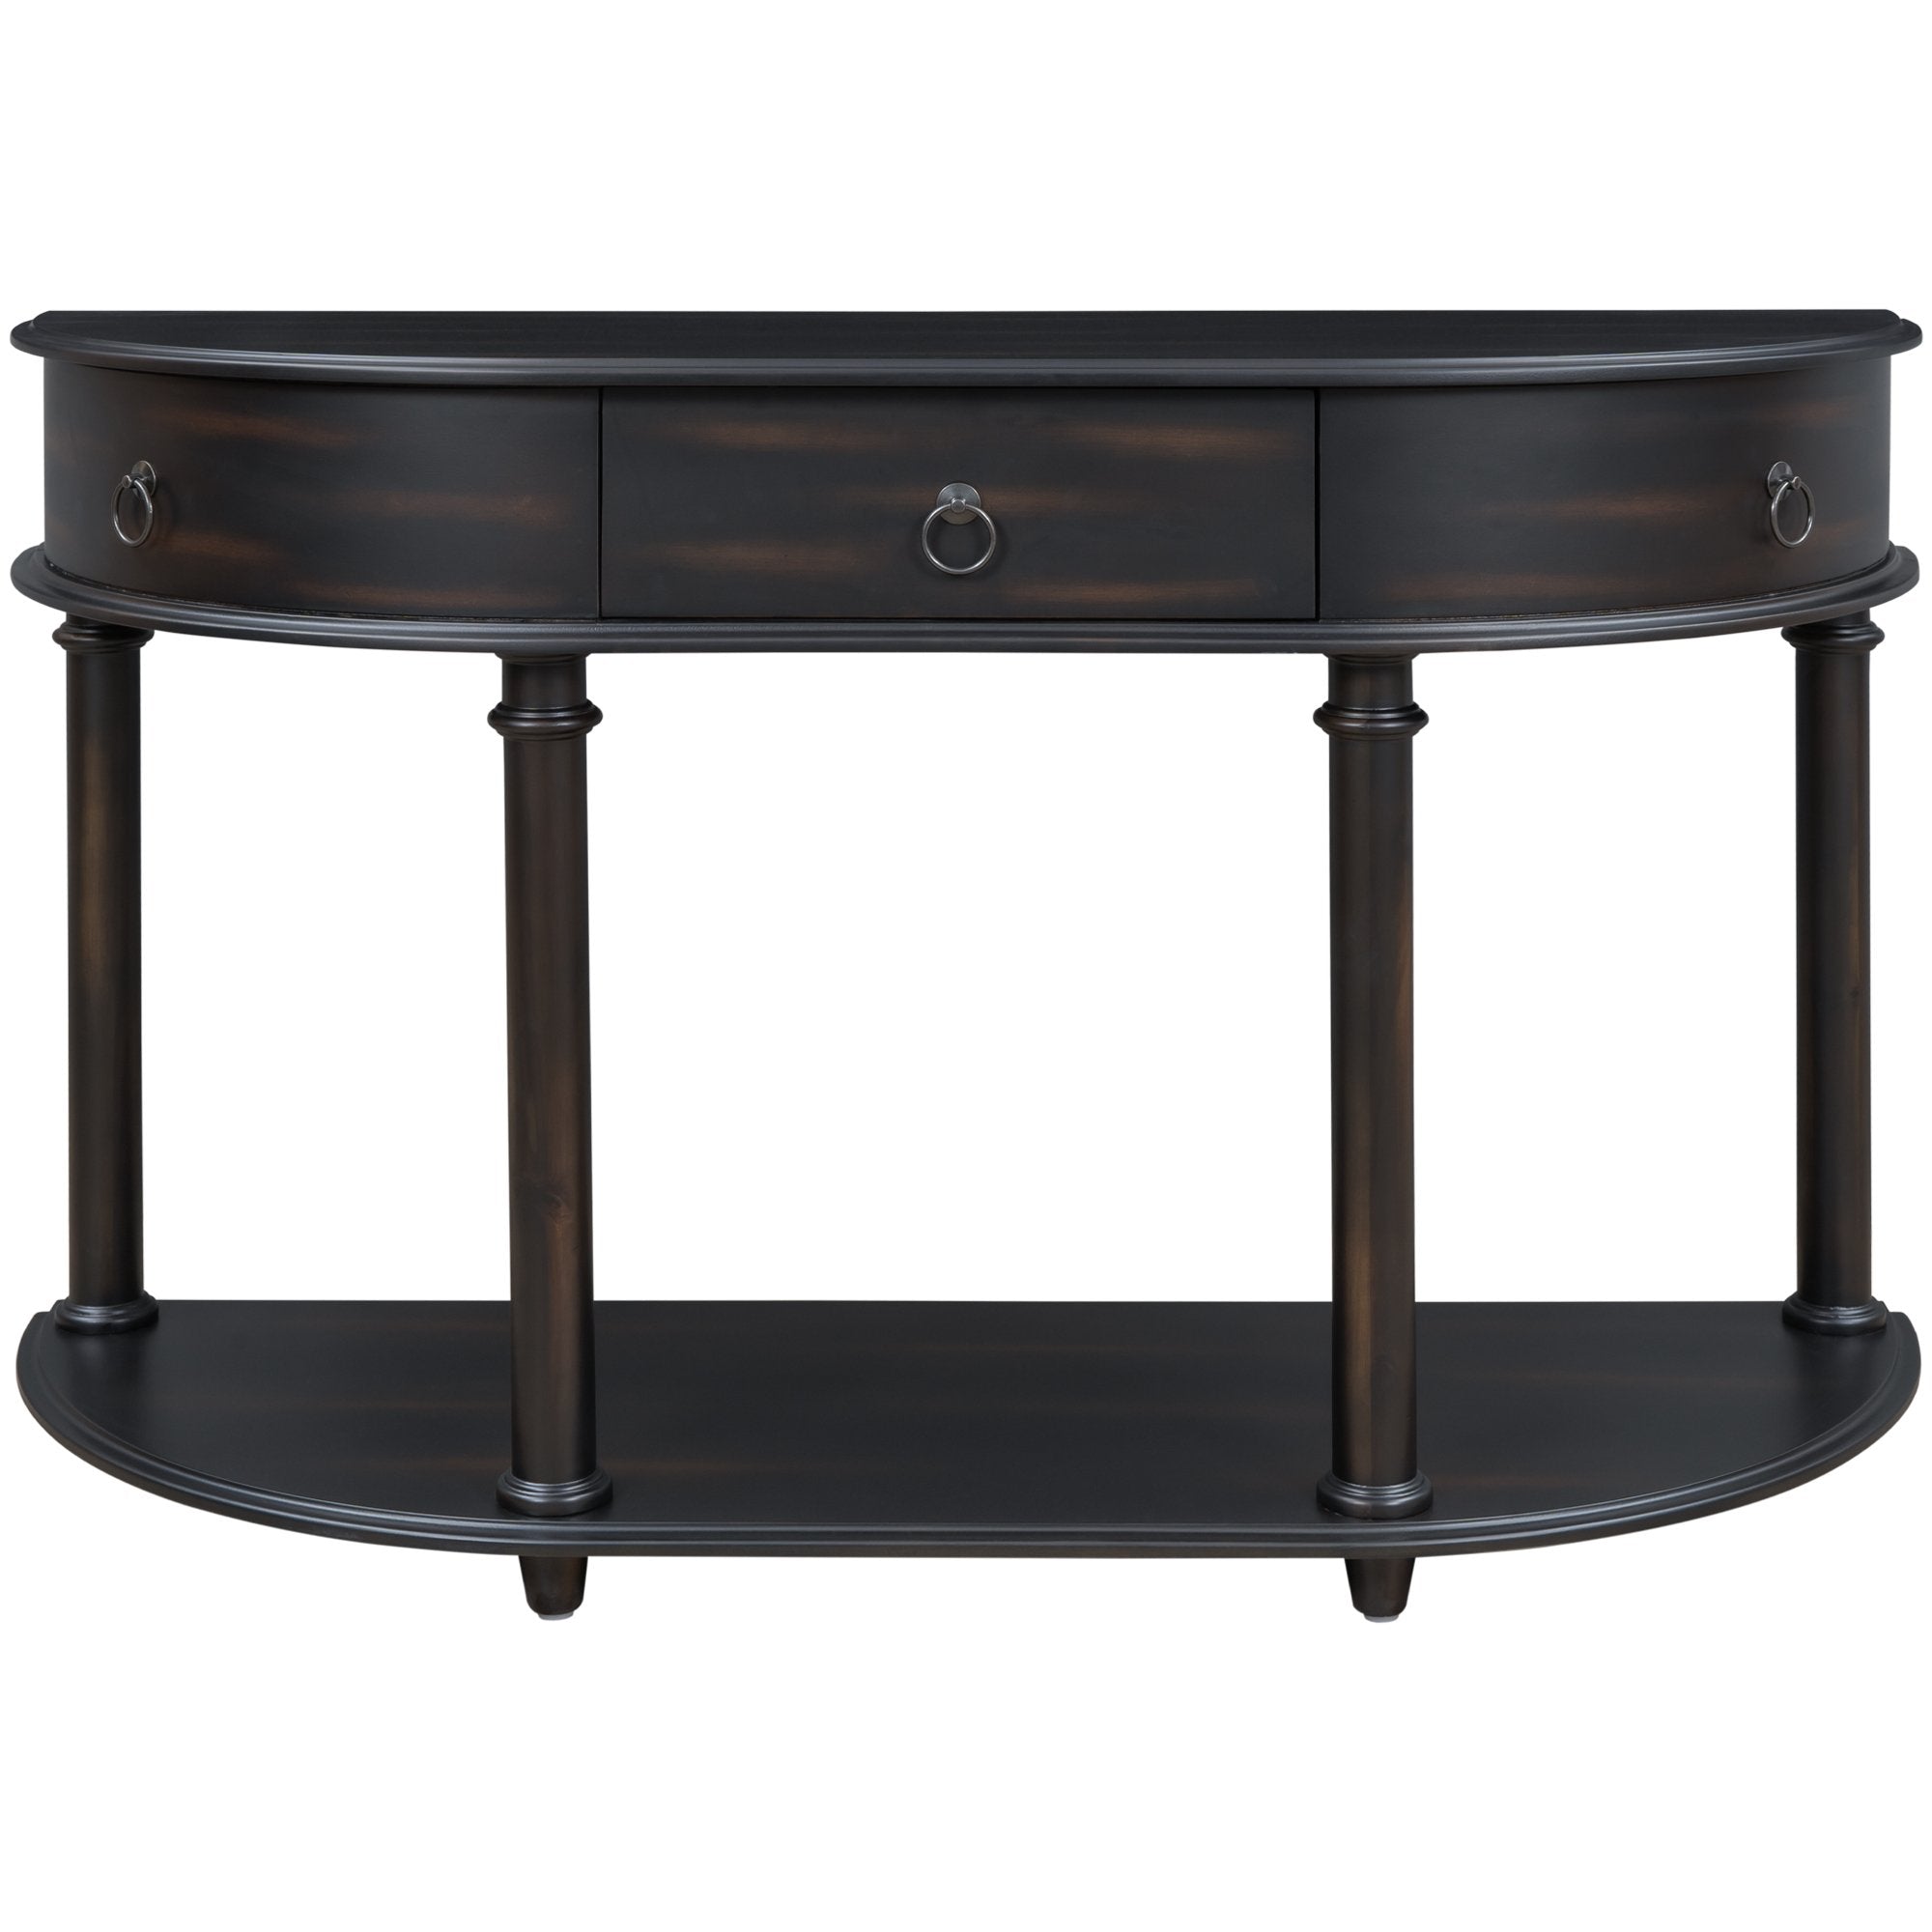 Retro Curved Console Table, Solid Wood Frame and Legs with Single Drawer Half Moon Entry Table